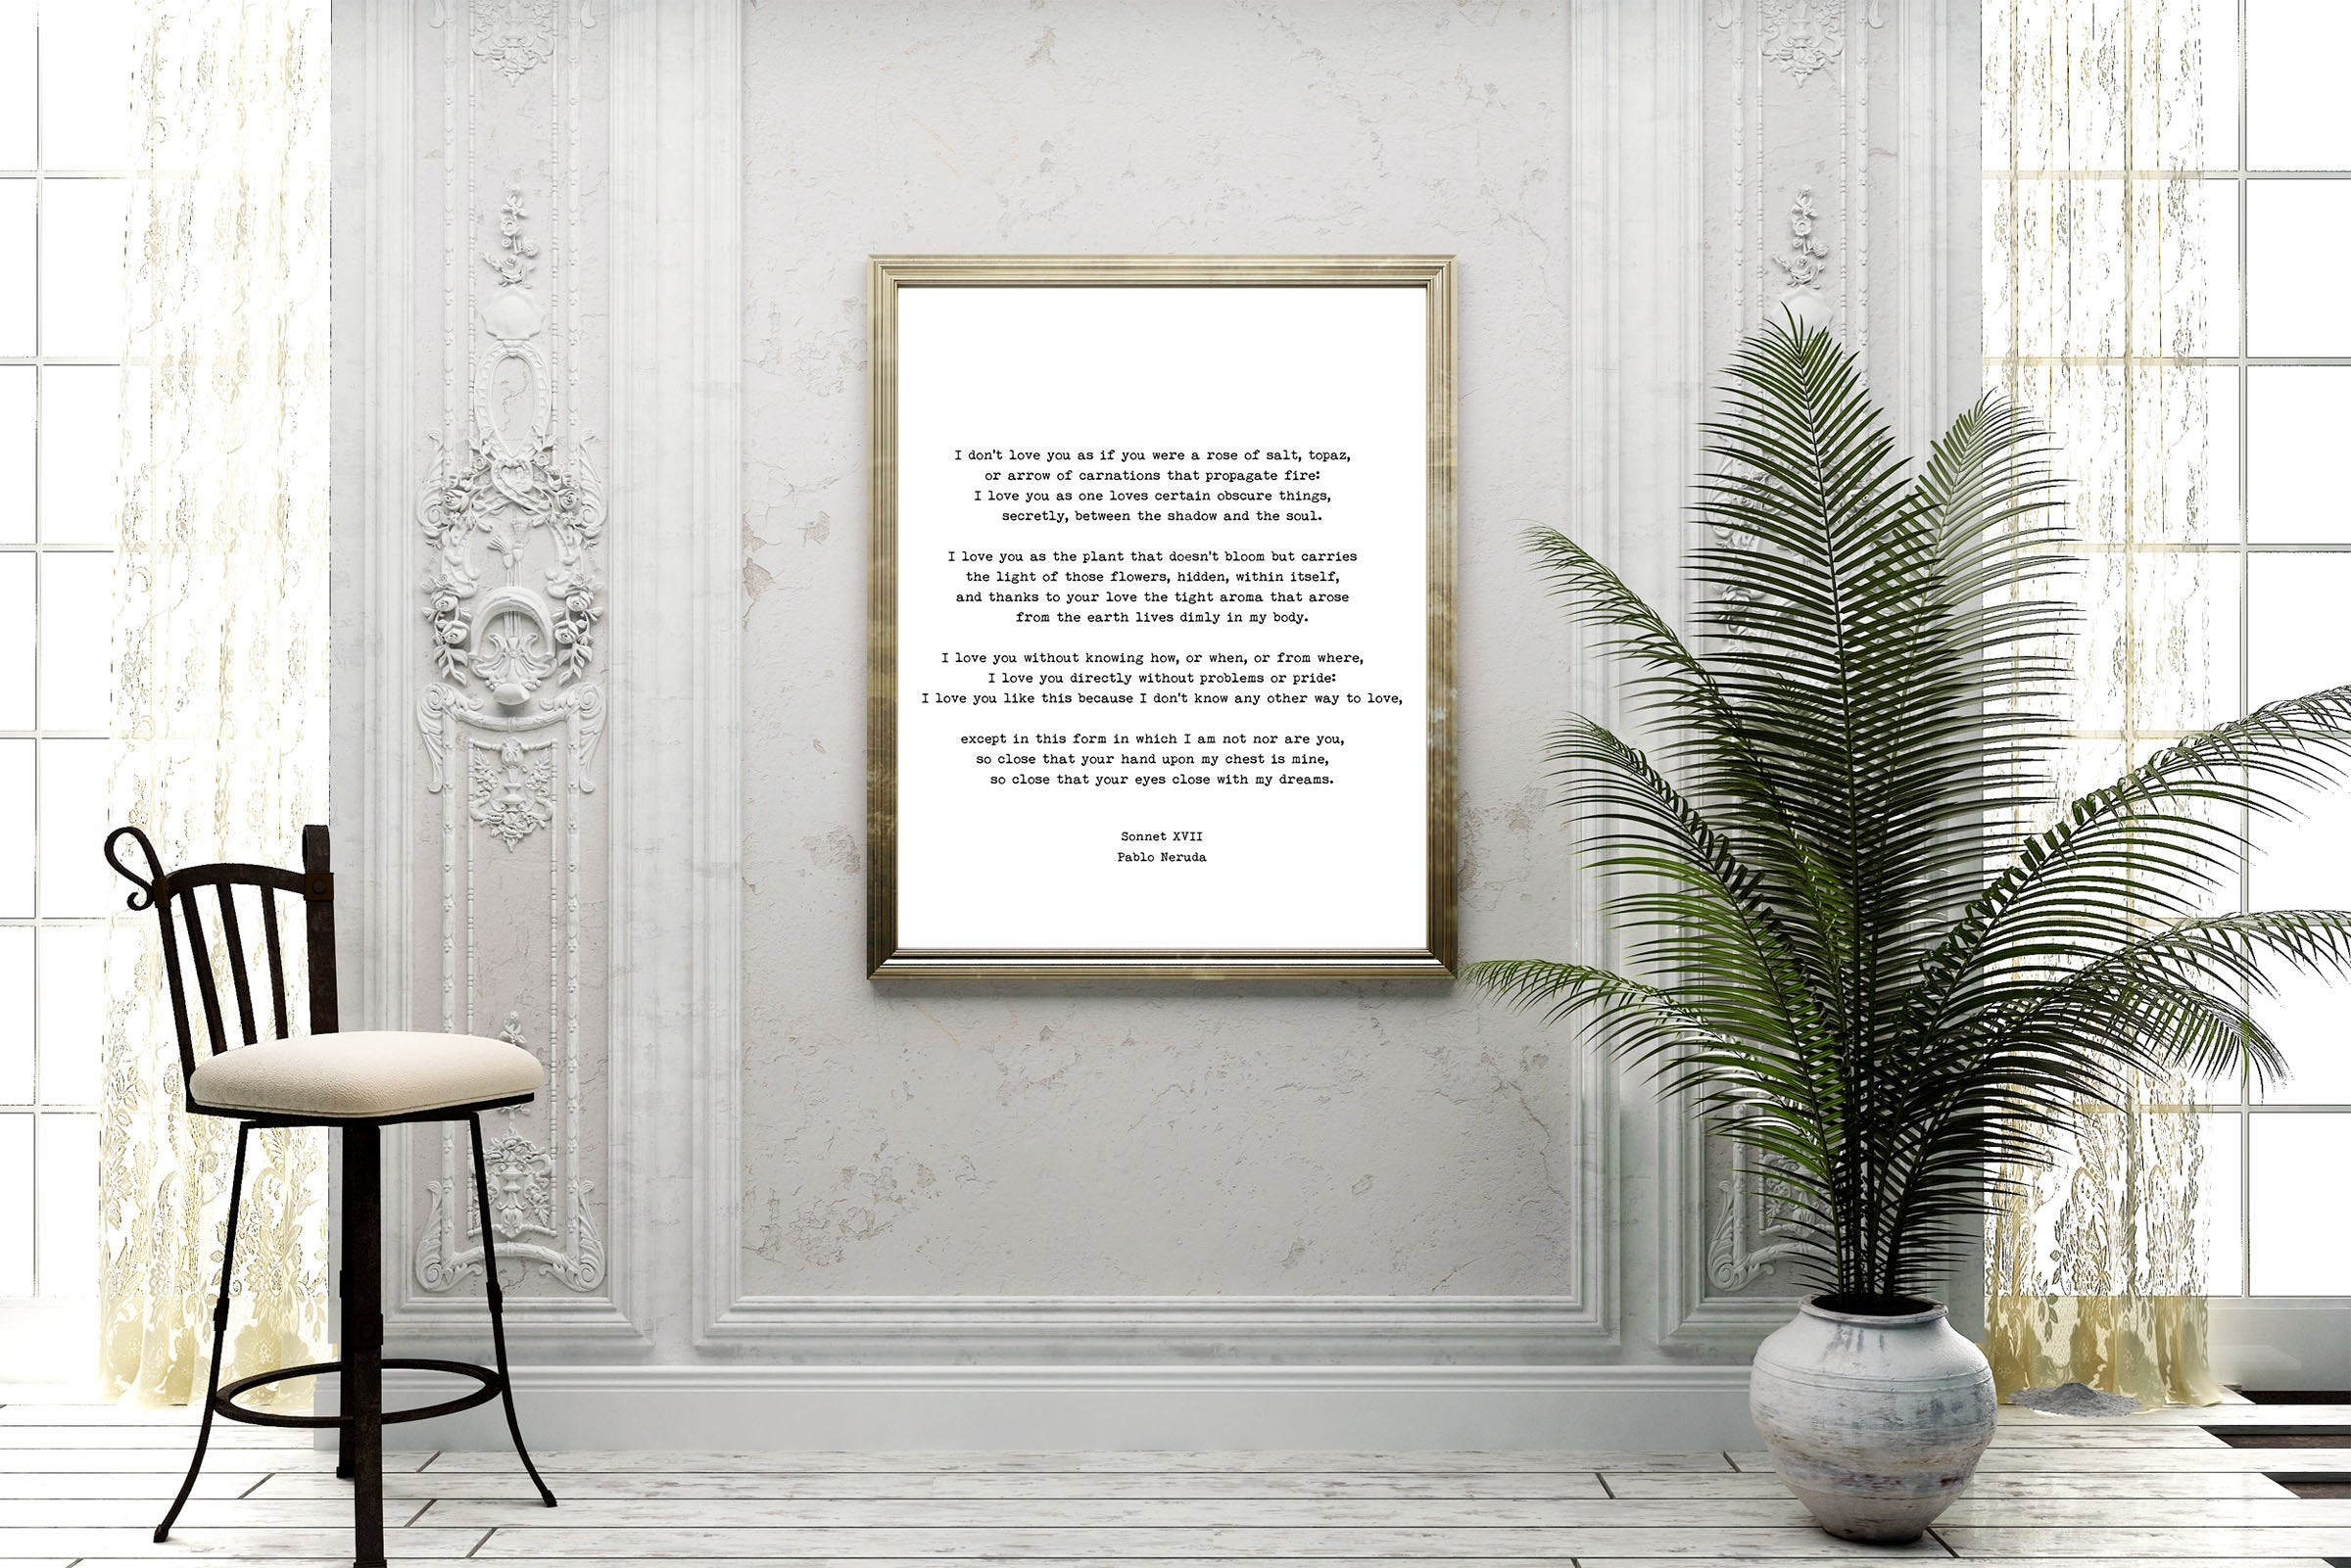 Pablo Neruda Love Poem Print, I Love You Without Knowing How Love Poetry Art, Gallery Wall Idea, Unframed - BookQuoteDecor